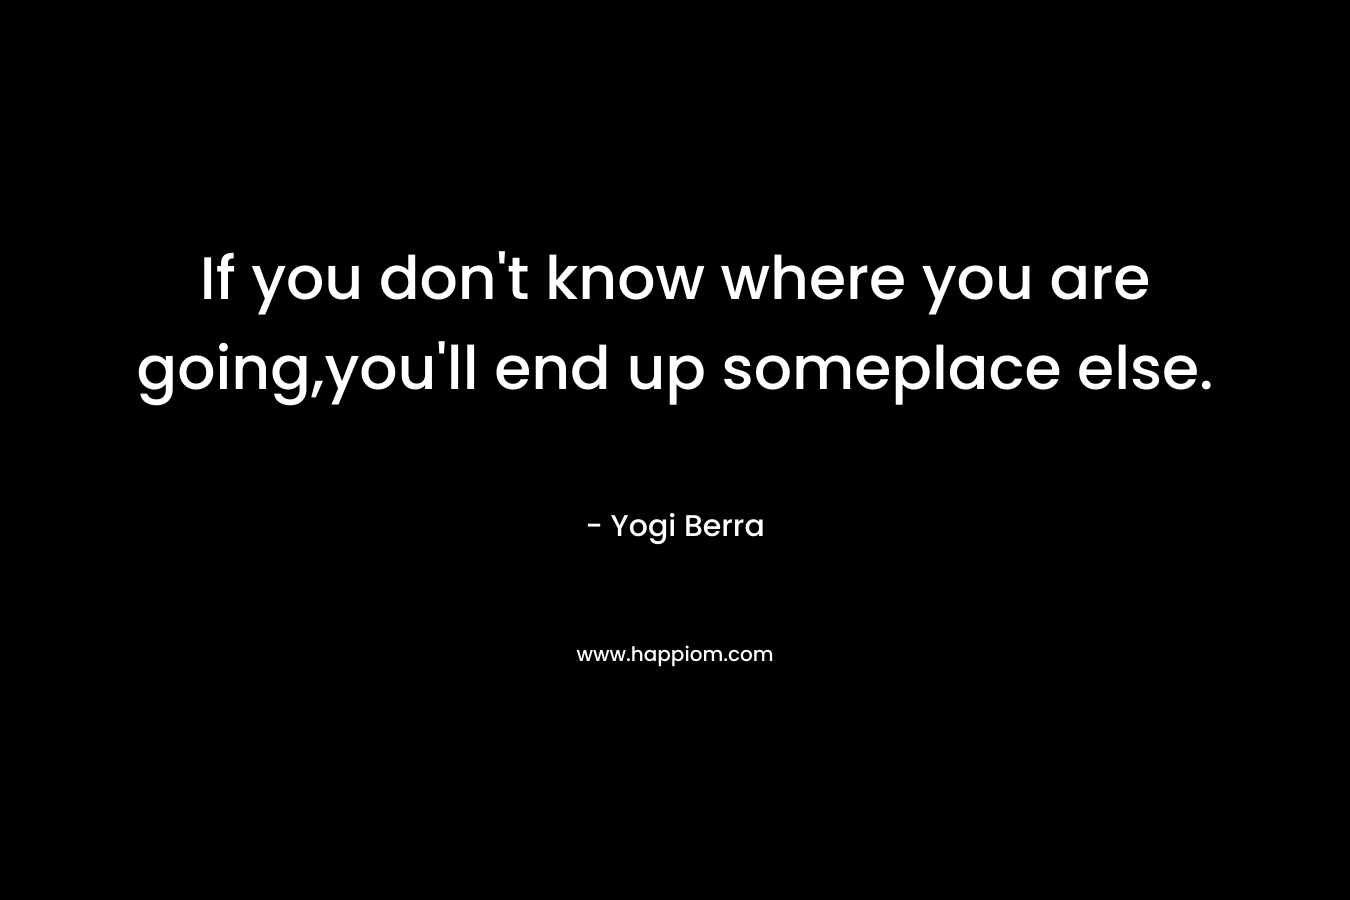 If you don't know where you are going,you'll end up someplace else.